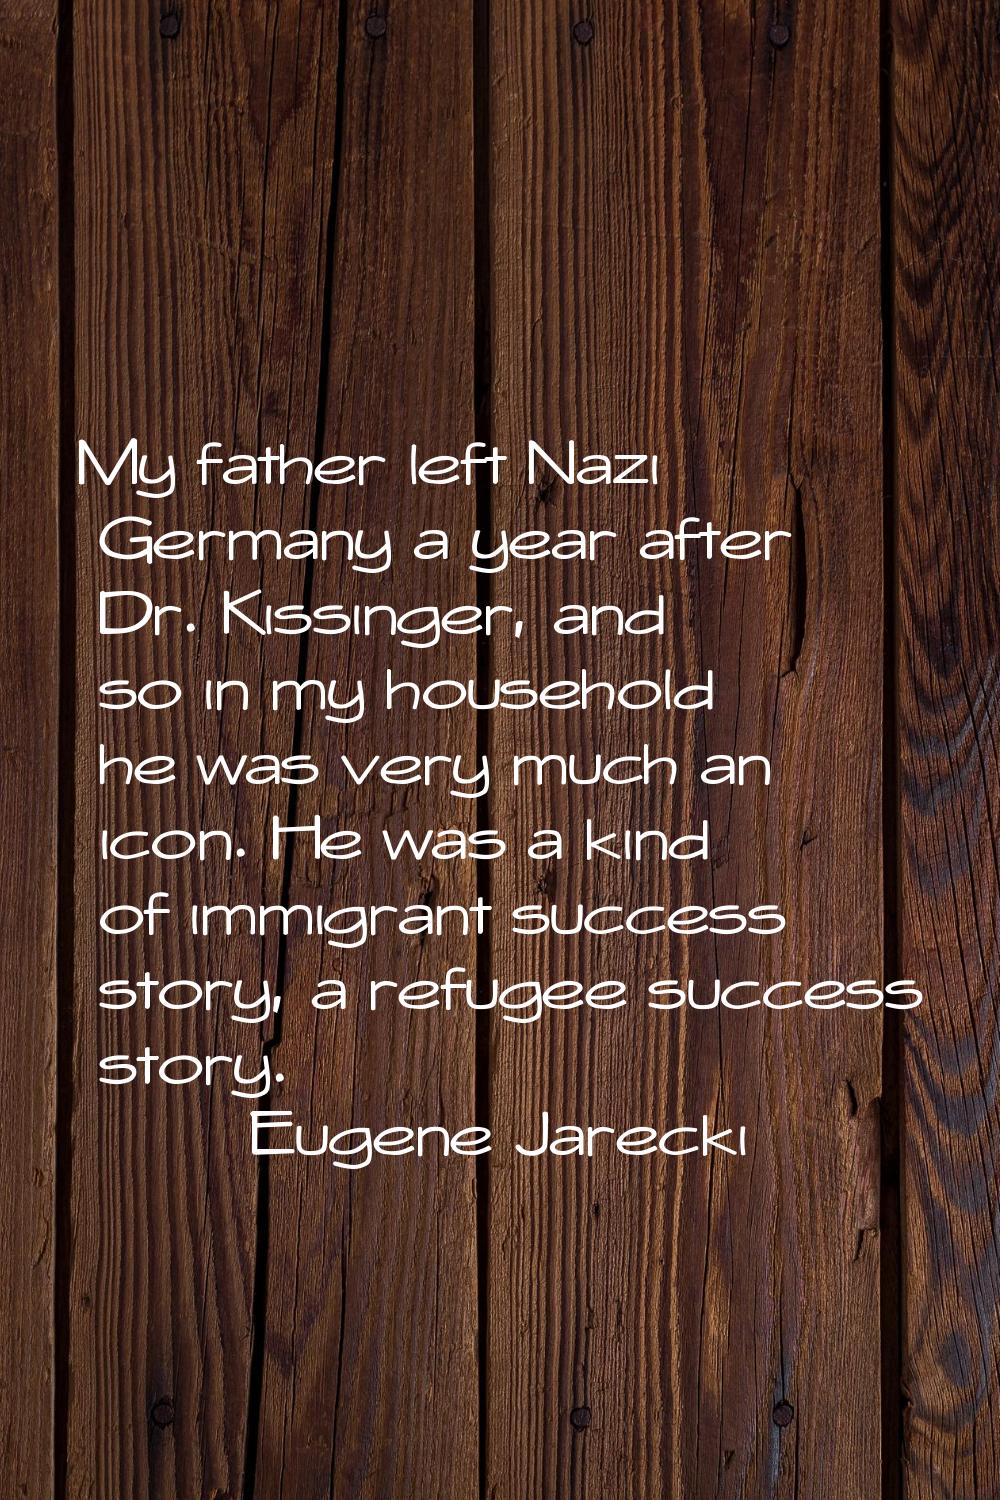 My father left Nazi Germany a year after Dr. Kissinger, and so in my household he was very much an 